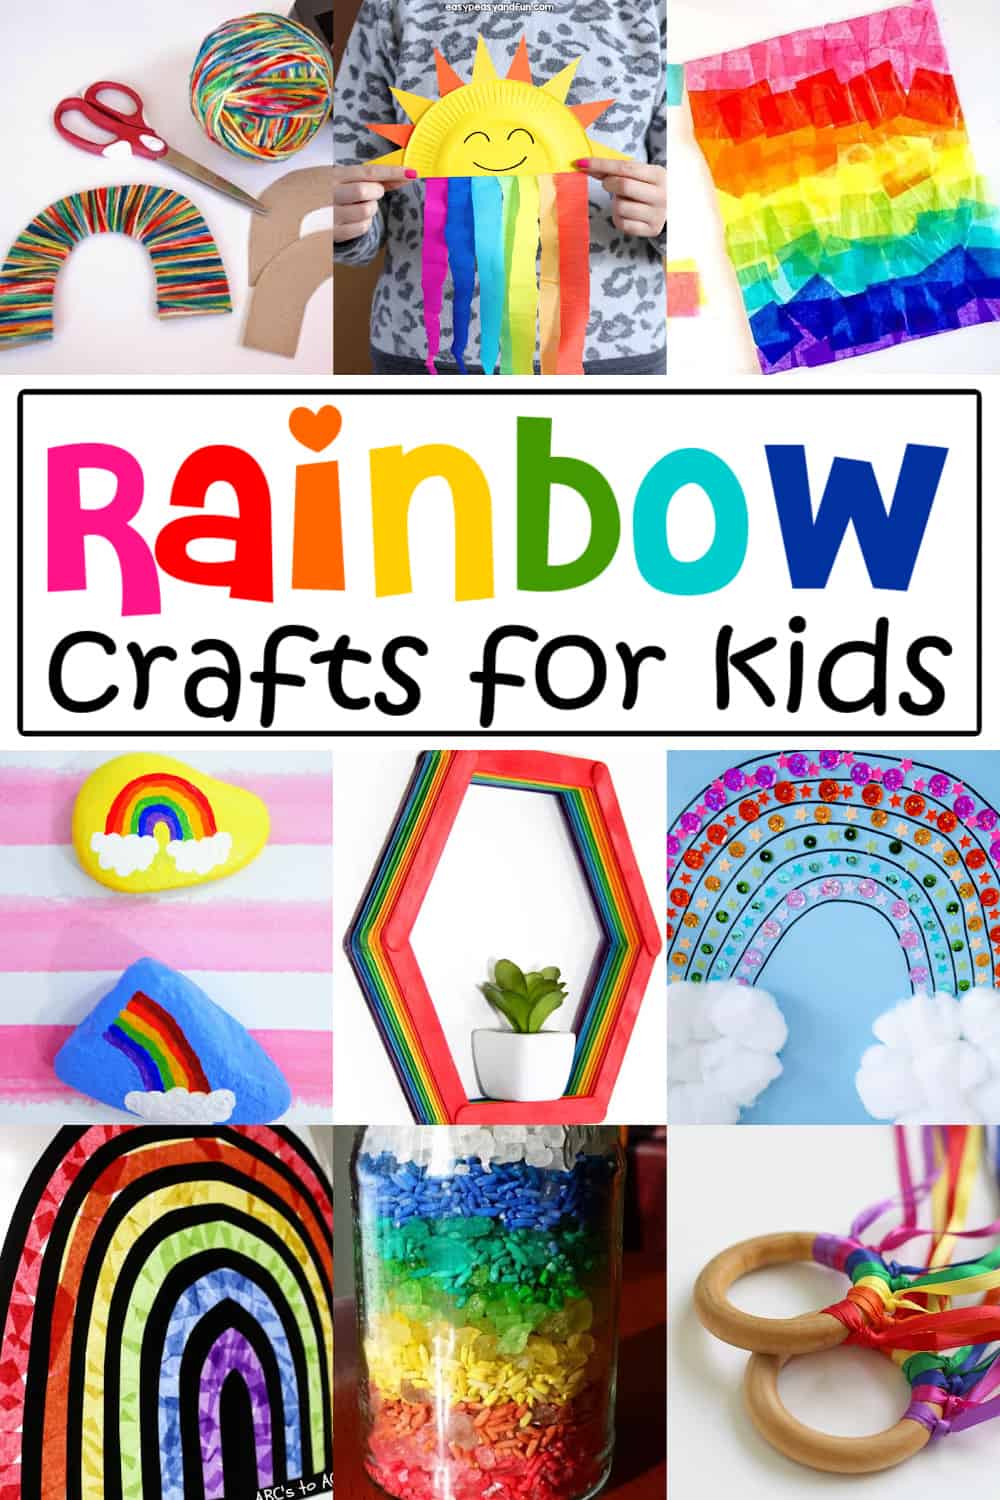 How-to Craft a What Makes a Rainbow? Inspired Tissue Paper Rainbow